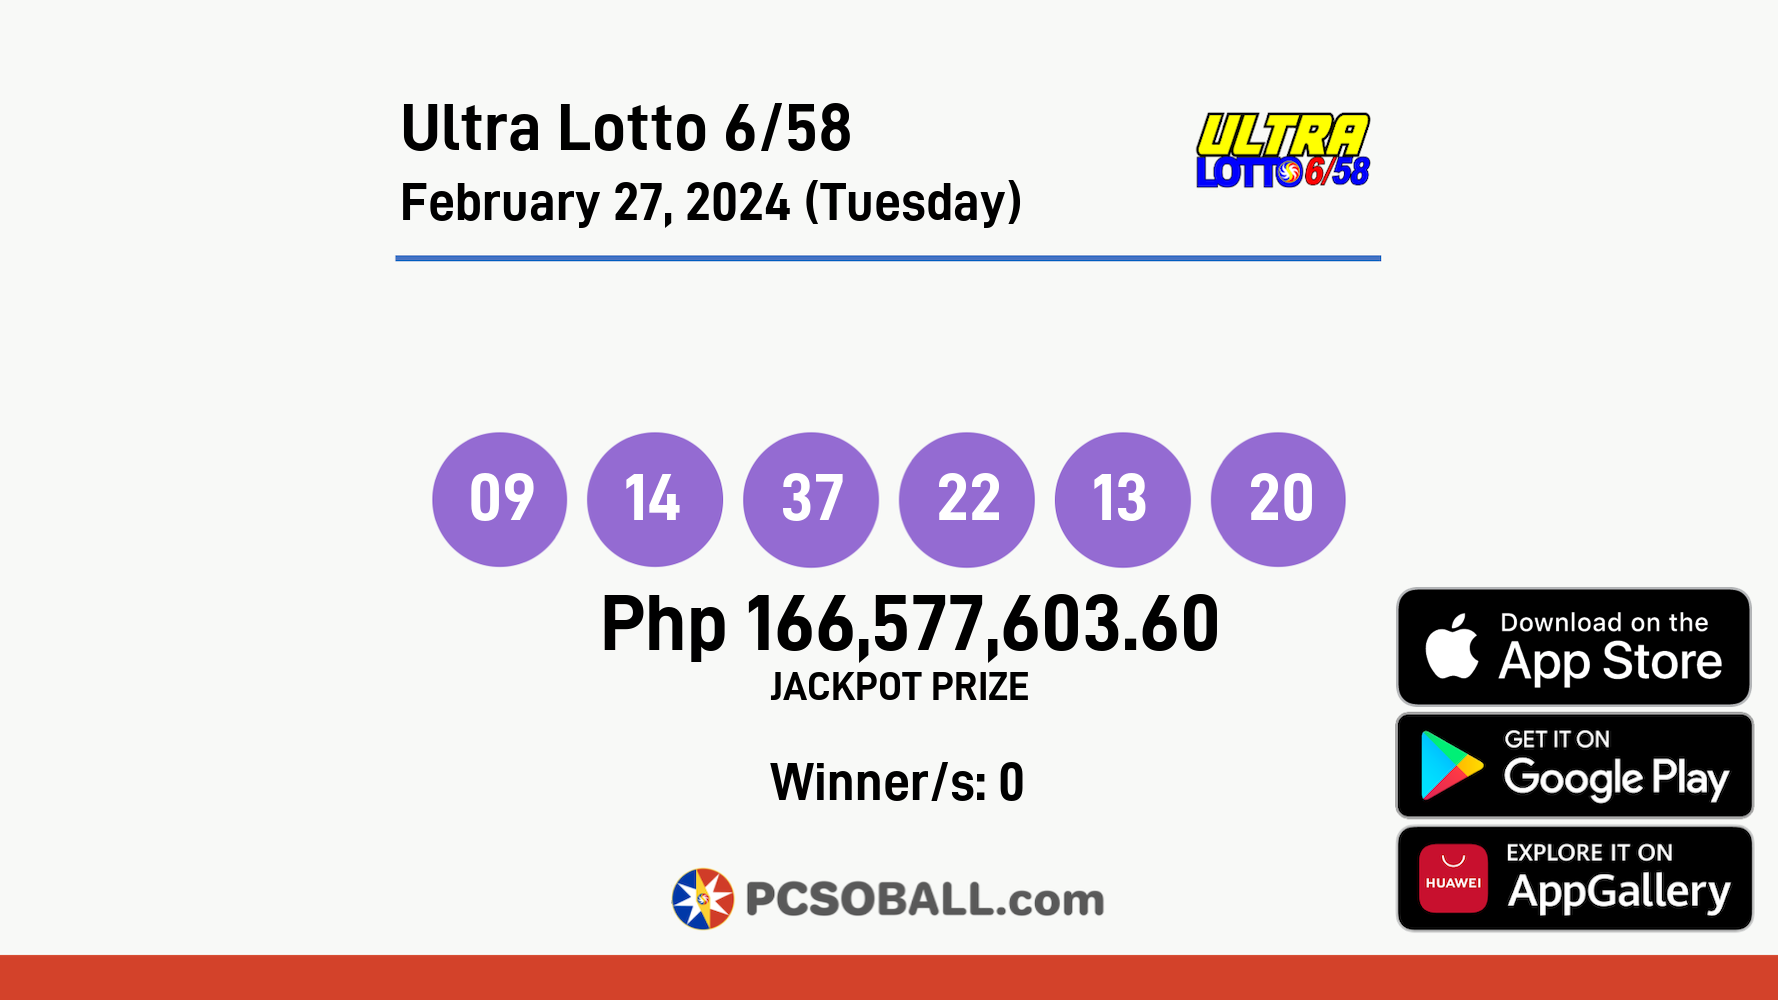 Ultra Lotto 6/58 February 27, 2024 (Tuesday) Result